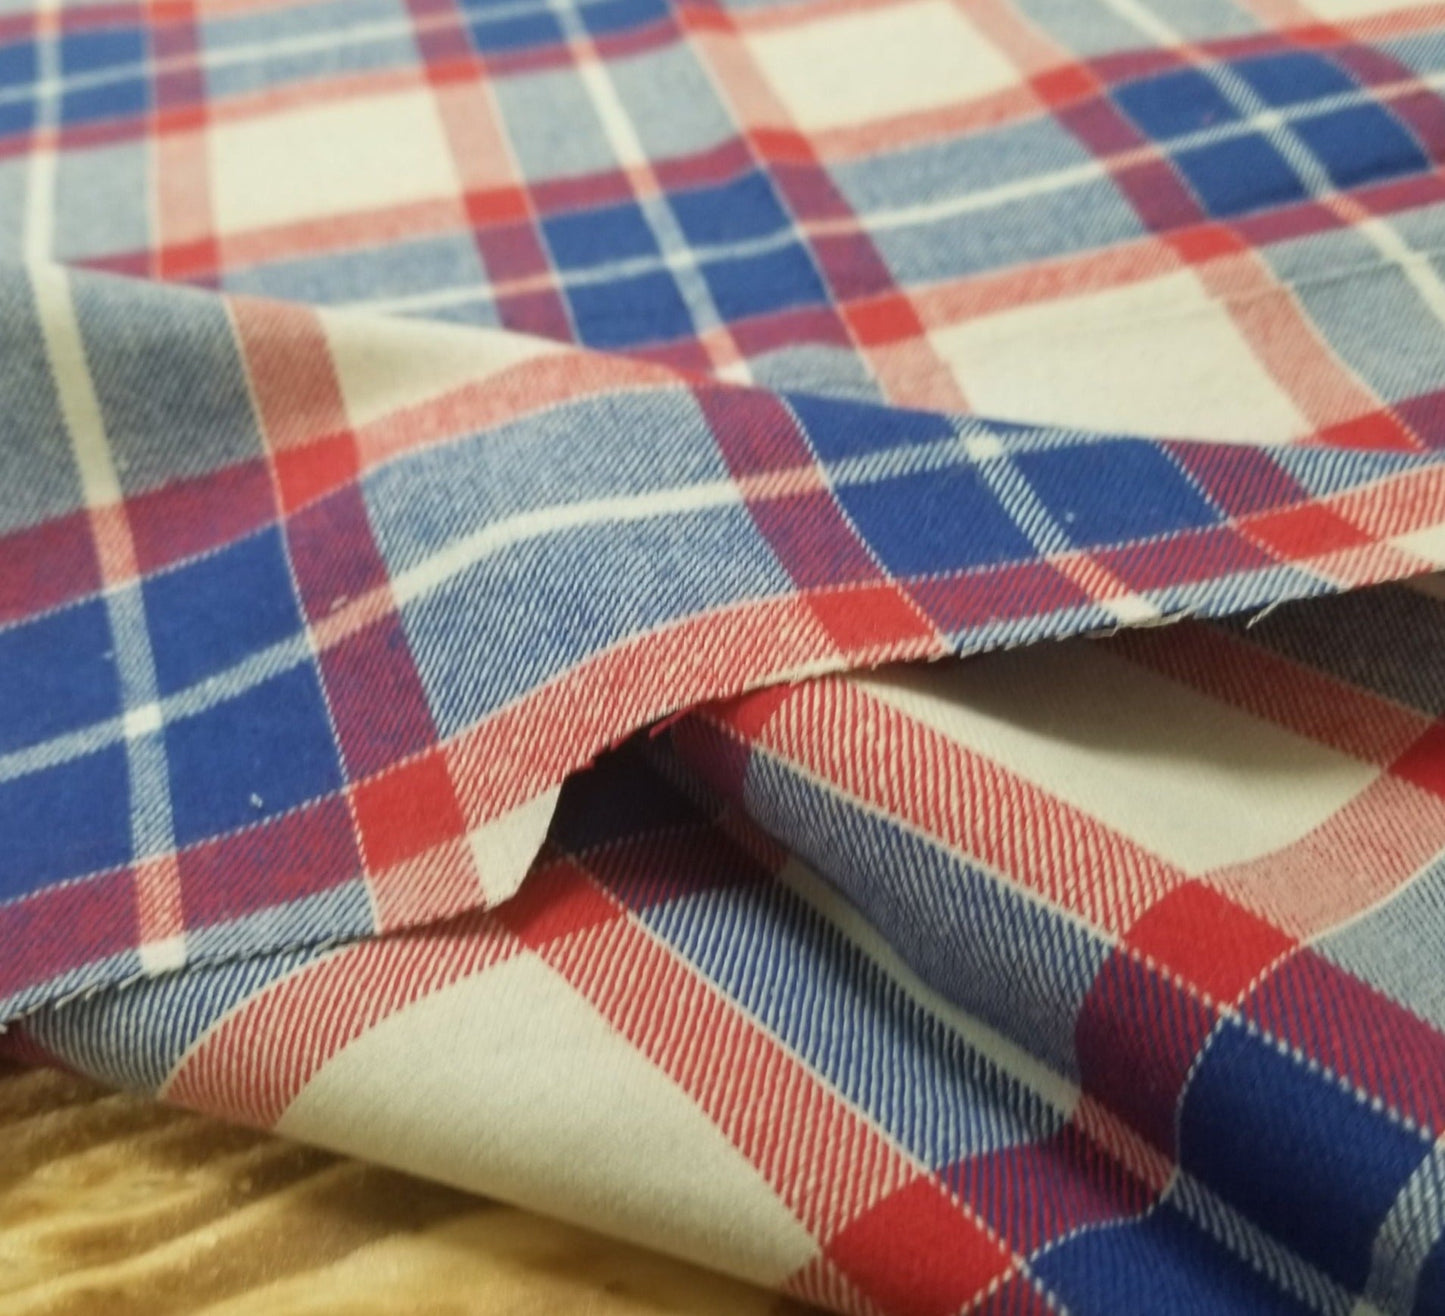 End of Bolt: 2.5 yards of Designer Deadstock Yarn Dyed Single Brushed Flannel Claremont Red and Blue Plaid Shirting Cotton Woven-Remnant